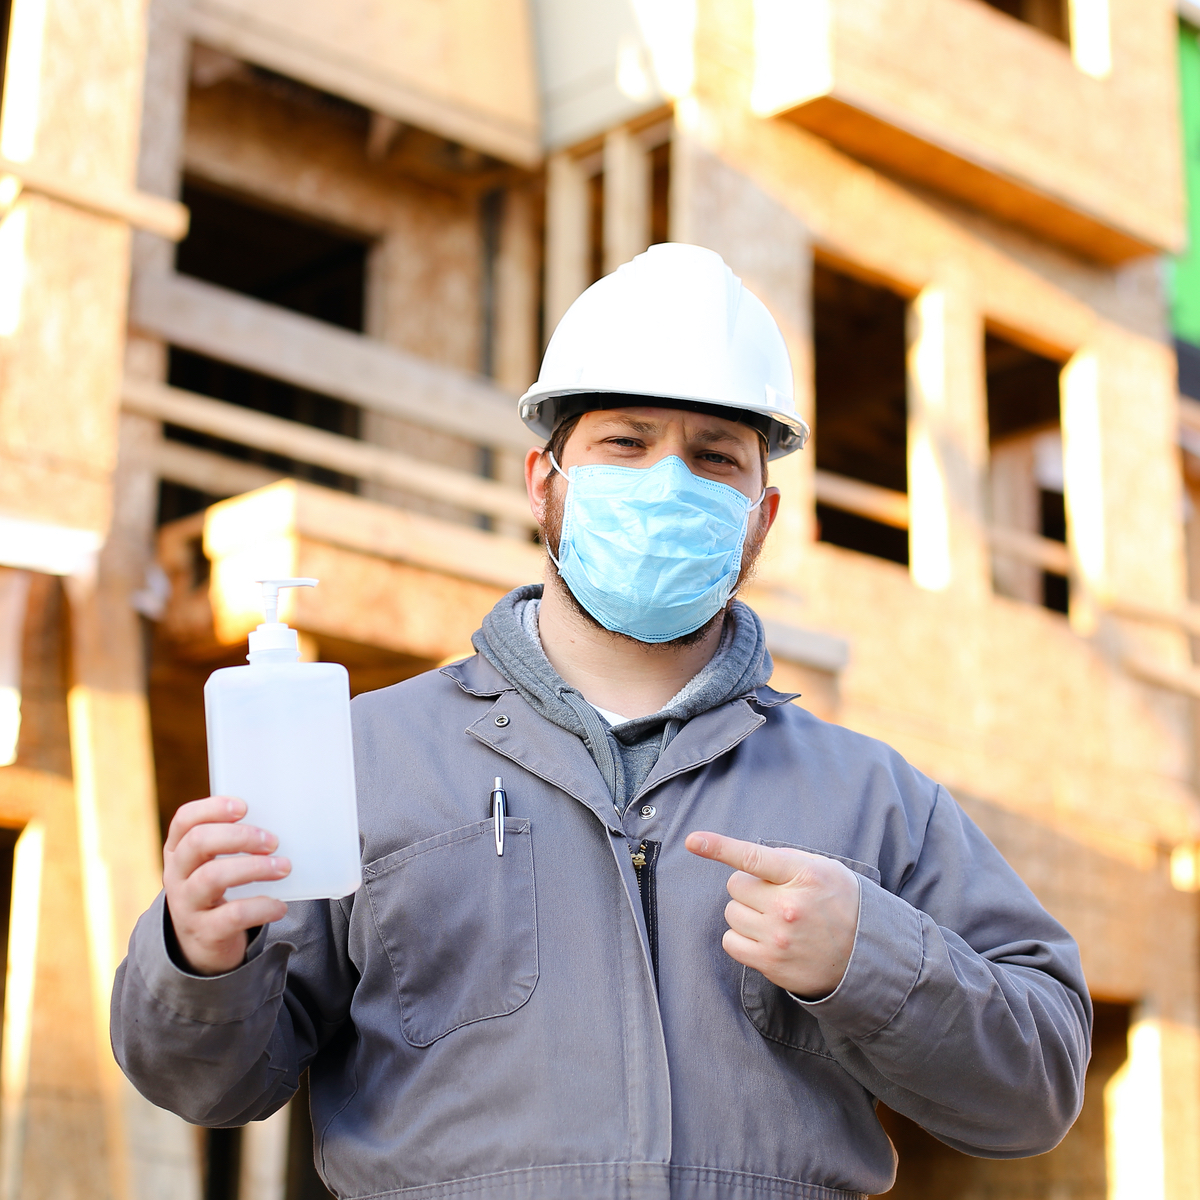 Masked construction foreman holding hand sanitizer in front of a home under construction